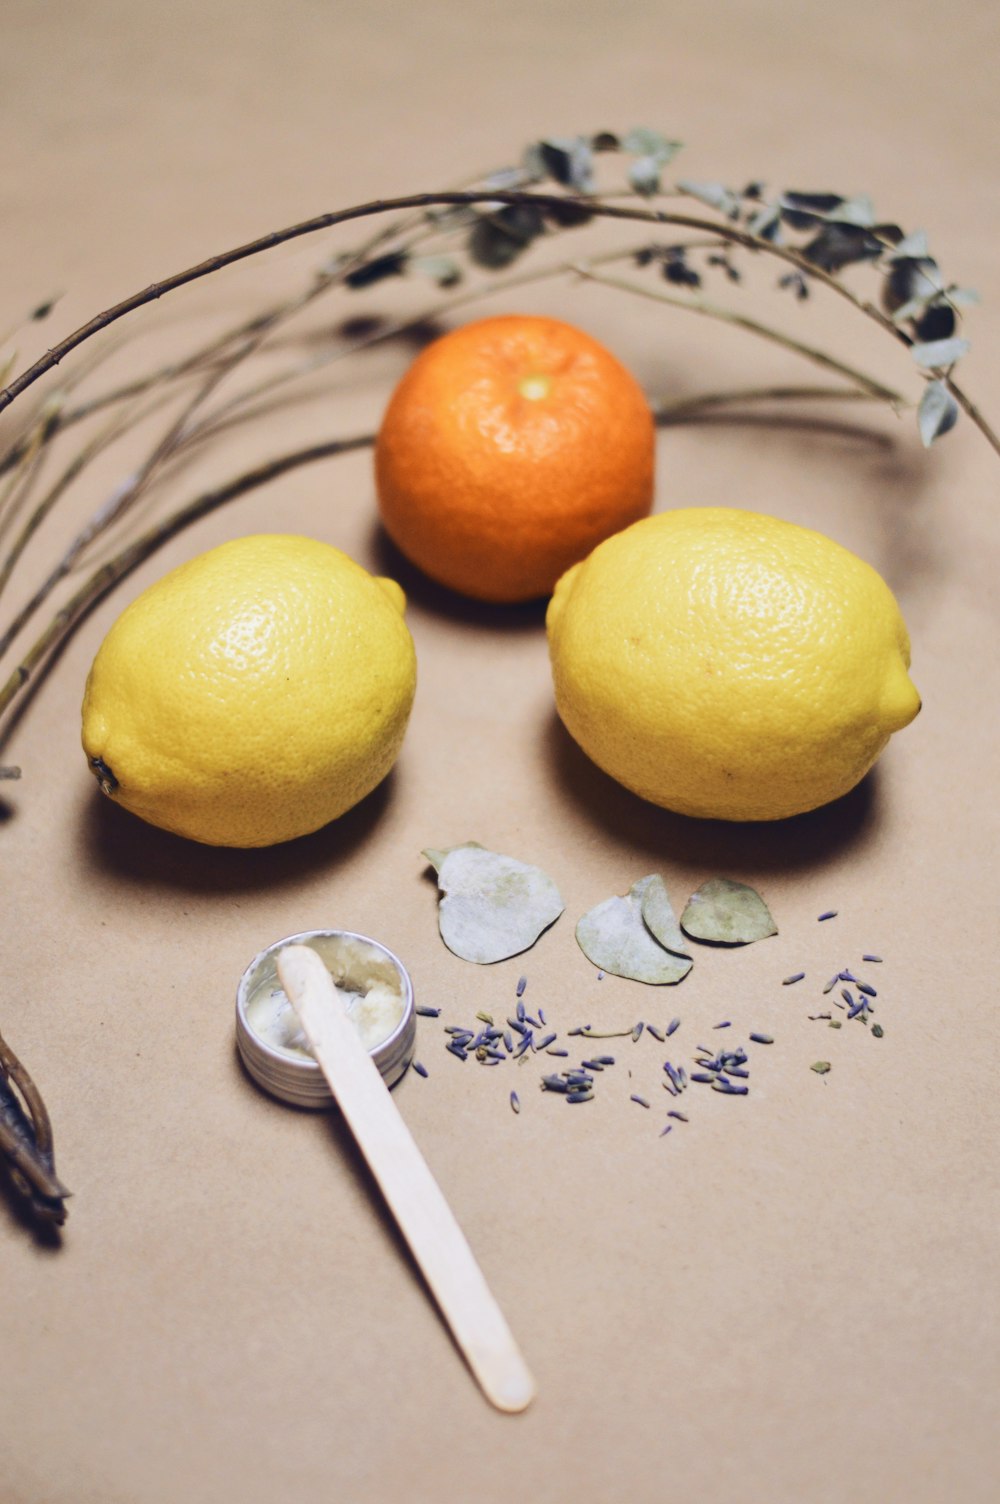 yellow lemon fruit beside silver fork on white and blue floral textile